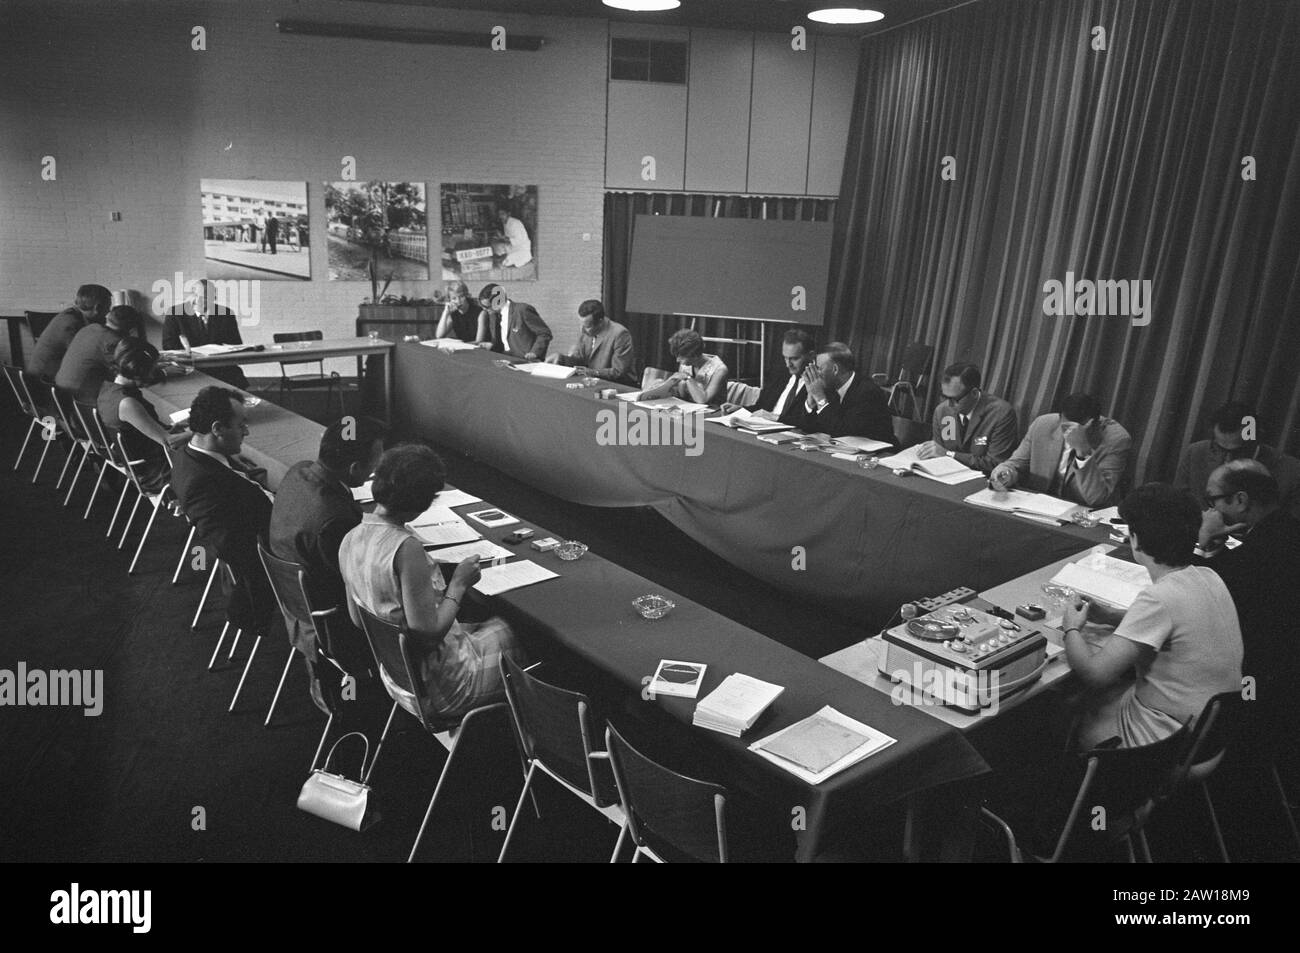 Assignment Foreign Affairs, Department of Education Development, hr.. The Big Date: September 12, 1969 Keywords: DEVELOPMENT Person Name: hr. De Groot Stock Photo